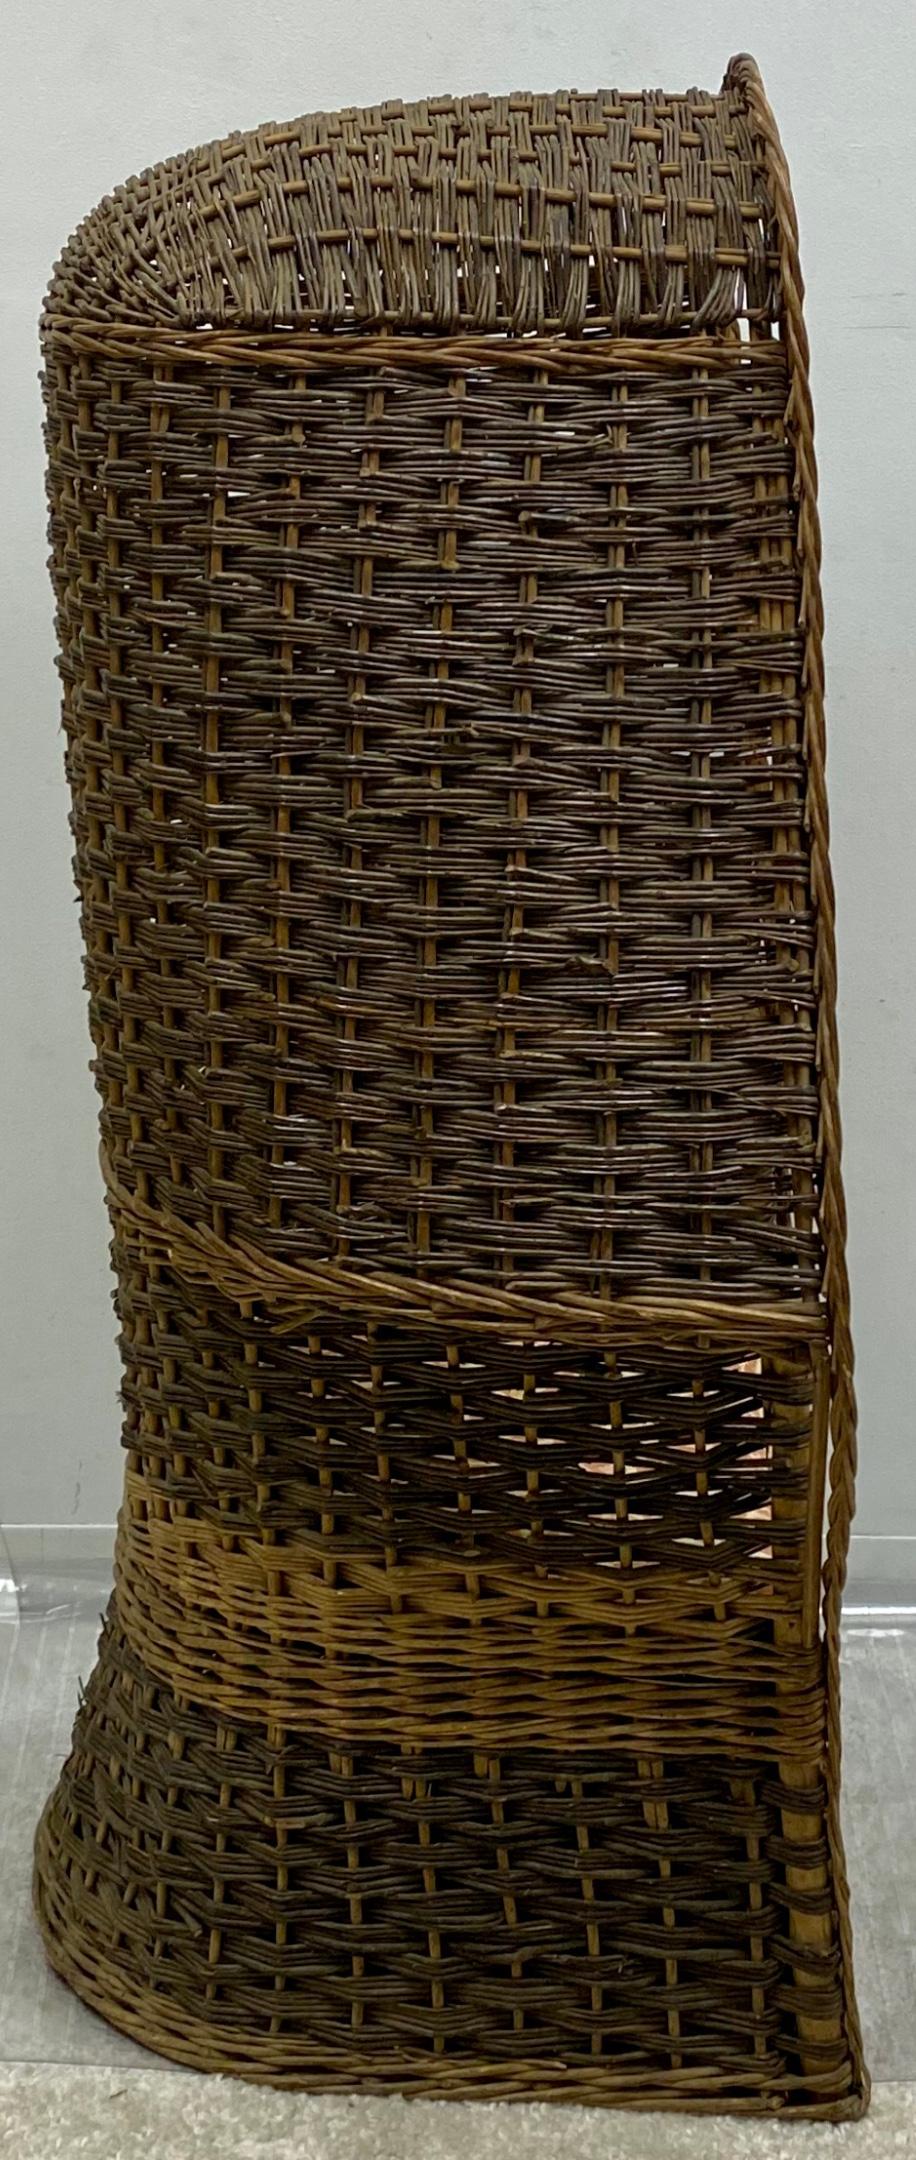 This is a 1930s hand woven wicker porter’s chair. It is a two tone weave and is in very good condition. An unusual find!